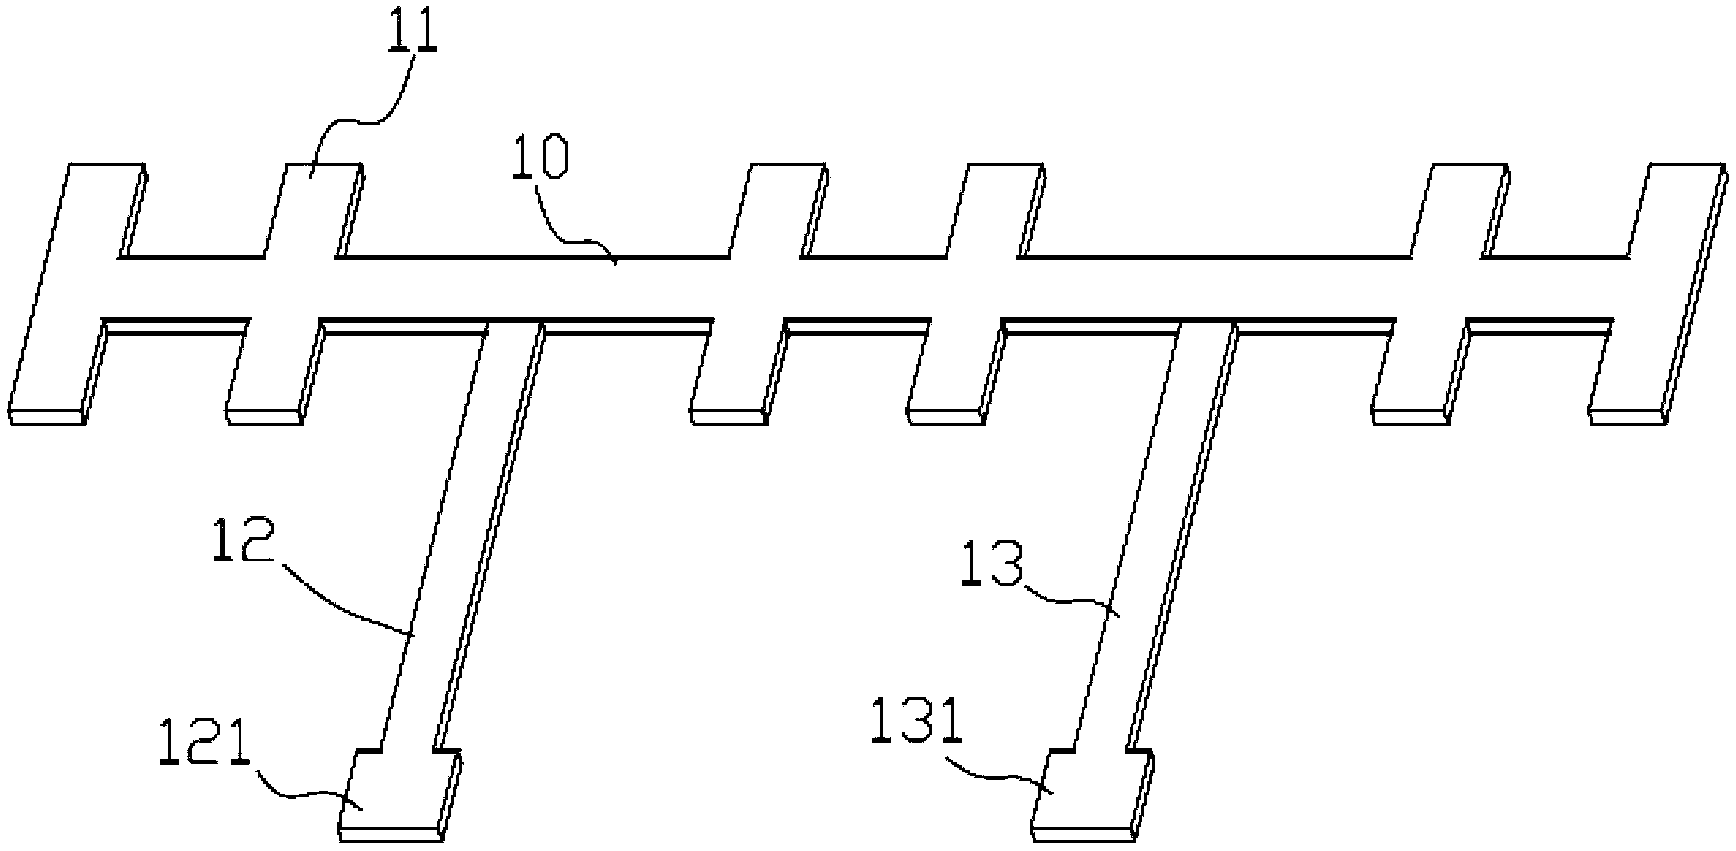 Circuit board structure and packaging structure for IGBT (insulated gate bipolar transistor) module